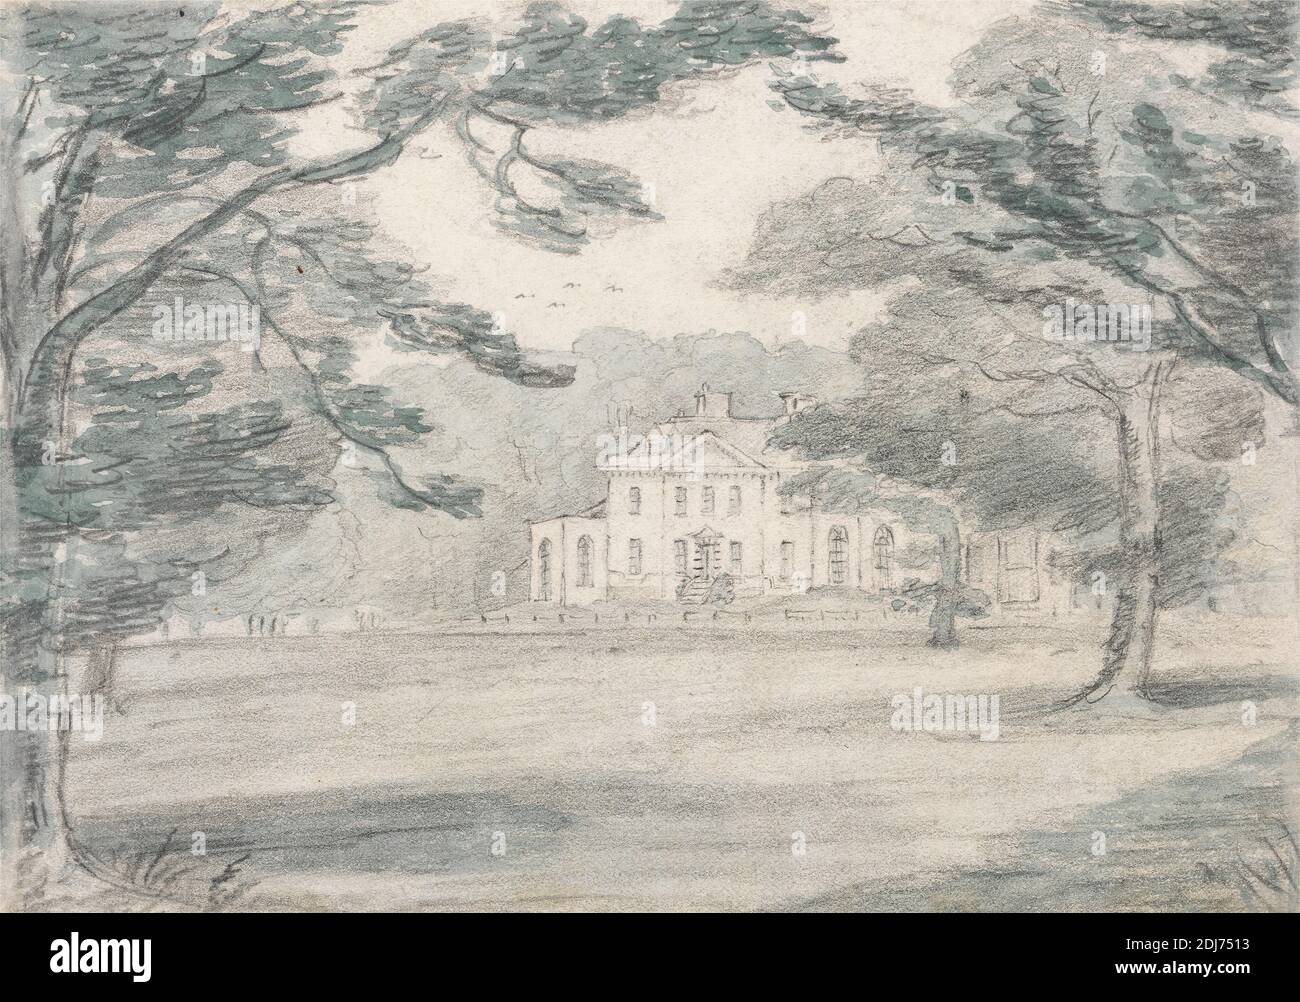 Havering Bower, Essex (A View of a Country Mansion), unknown artist, nineteenth century, formerly John Constable, 1776–1837, British, 1819, Green wash and graphite on medium, smooth, blued white wove paper, Sheet: 4 5/8 x 6 5/8 inches (11.7 x 16.8 cm), architectural subject, architecture, country (rural landscape), house, landscape, mansion, England, Essex, Europe, Greater London, Havering-atte-Bower, United Kingdom Stock Photo